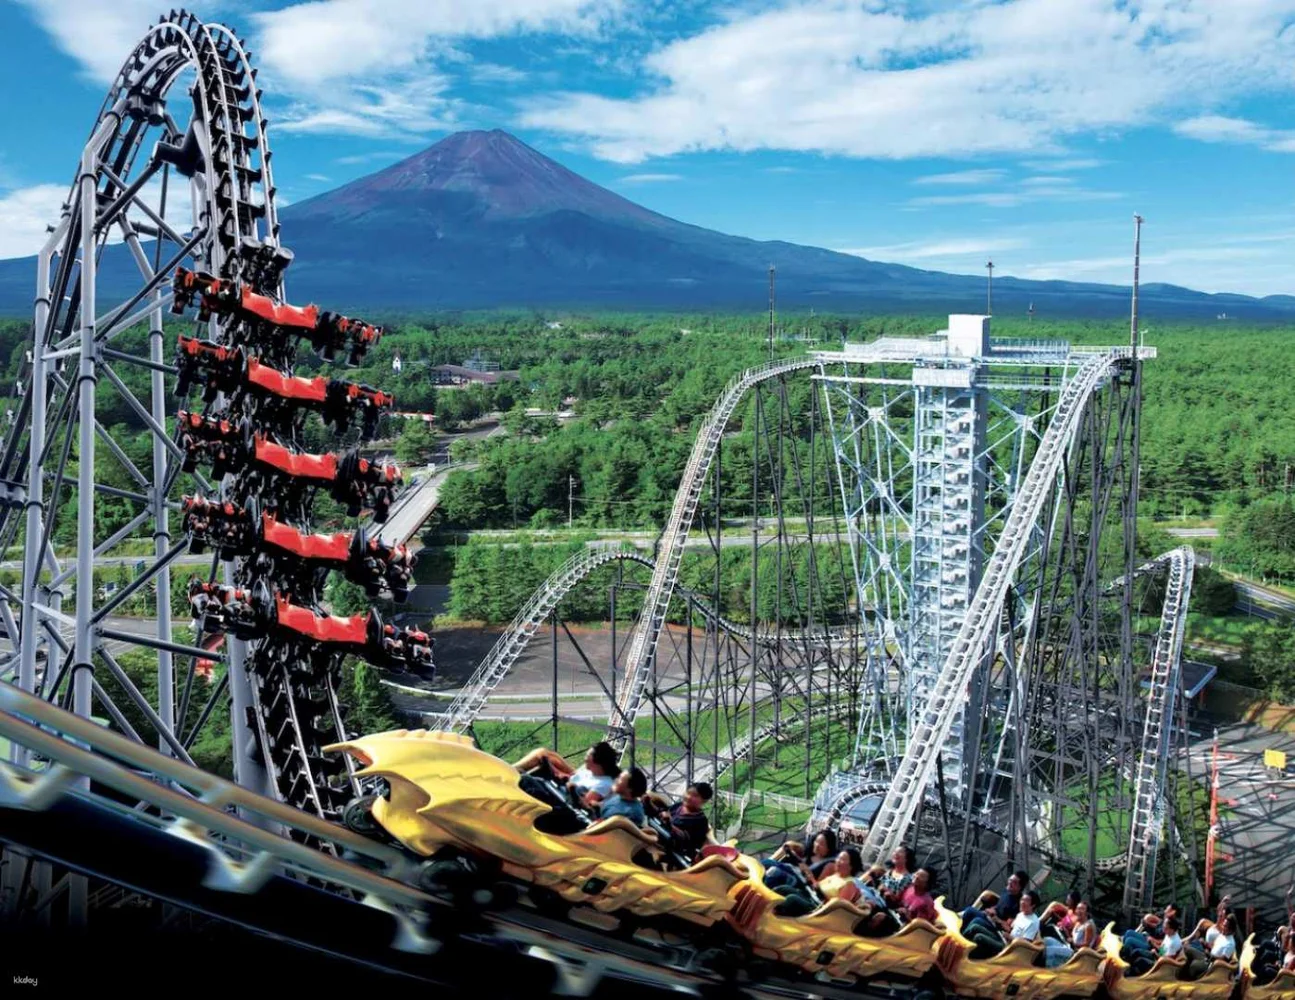 Buy Mt Fuji Pass Online – 1, 2 or 3 Days Unlimited Travel Ticket